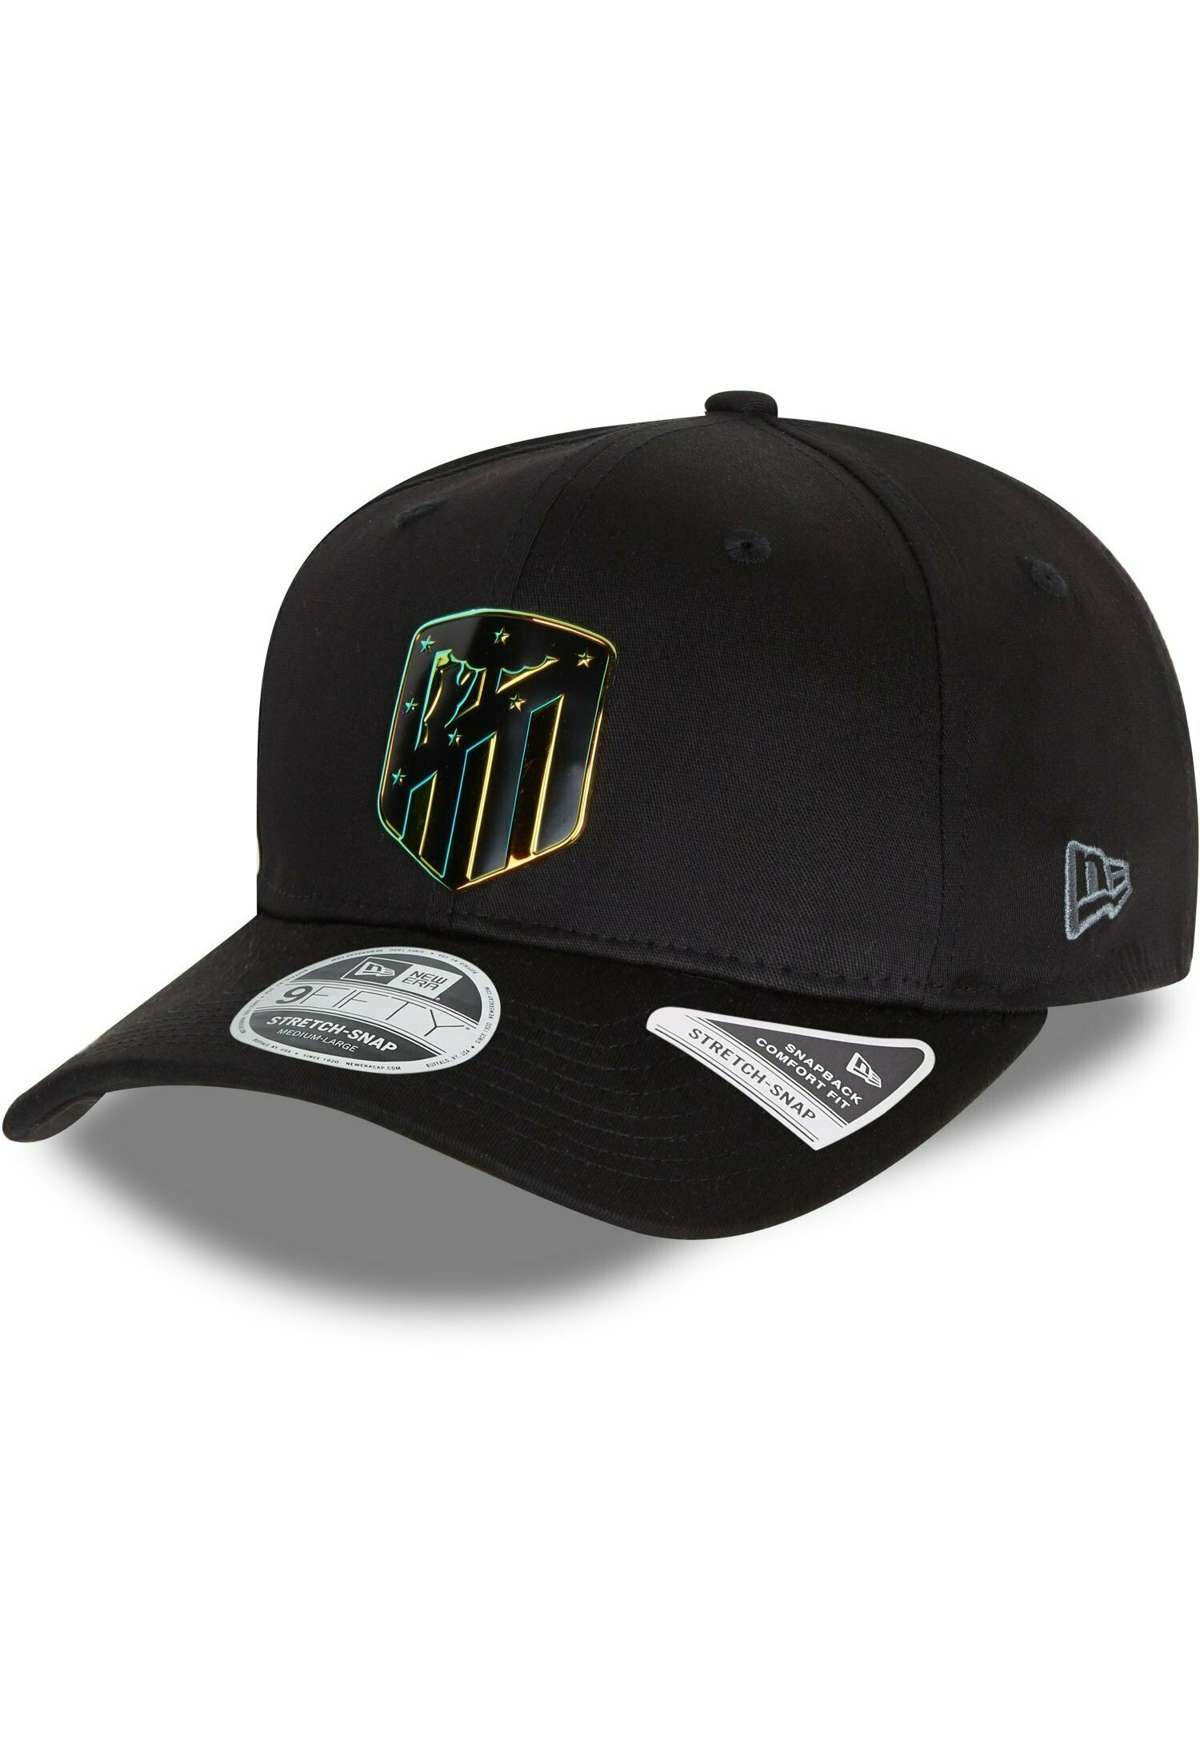 Кепка 9FIFTY STRETCH SNAP IRIDESCENT ATLETICO MADRID